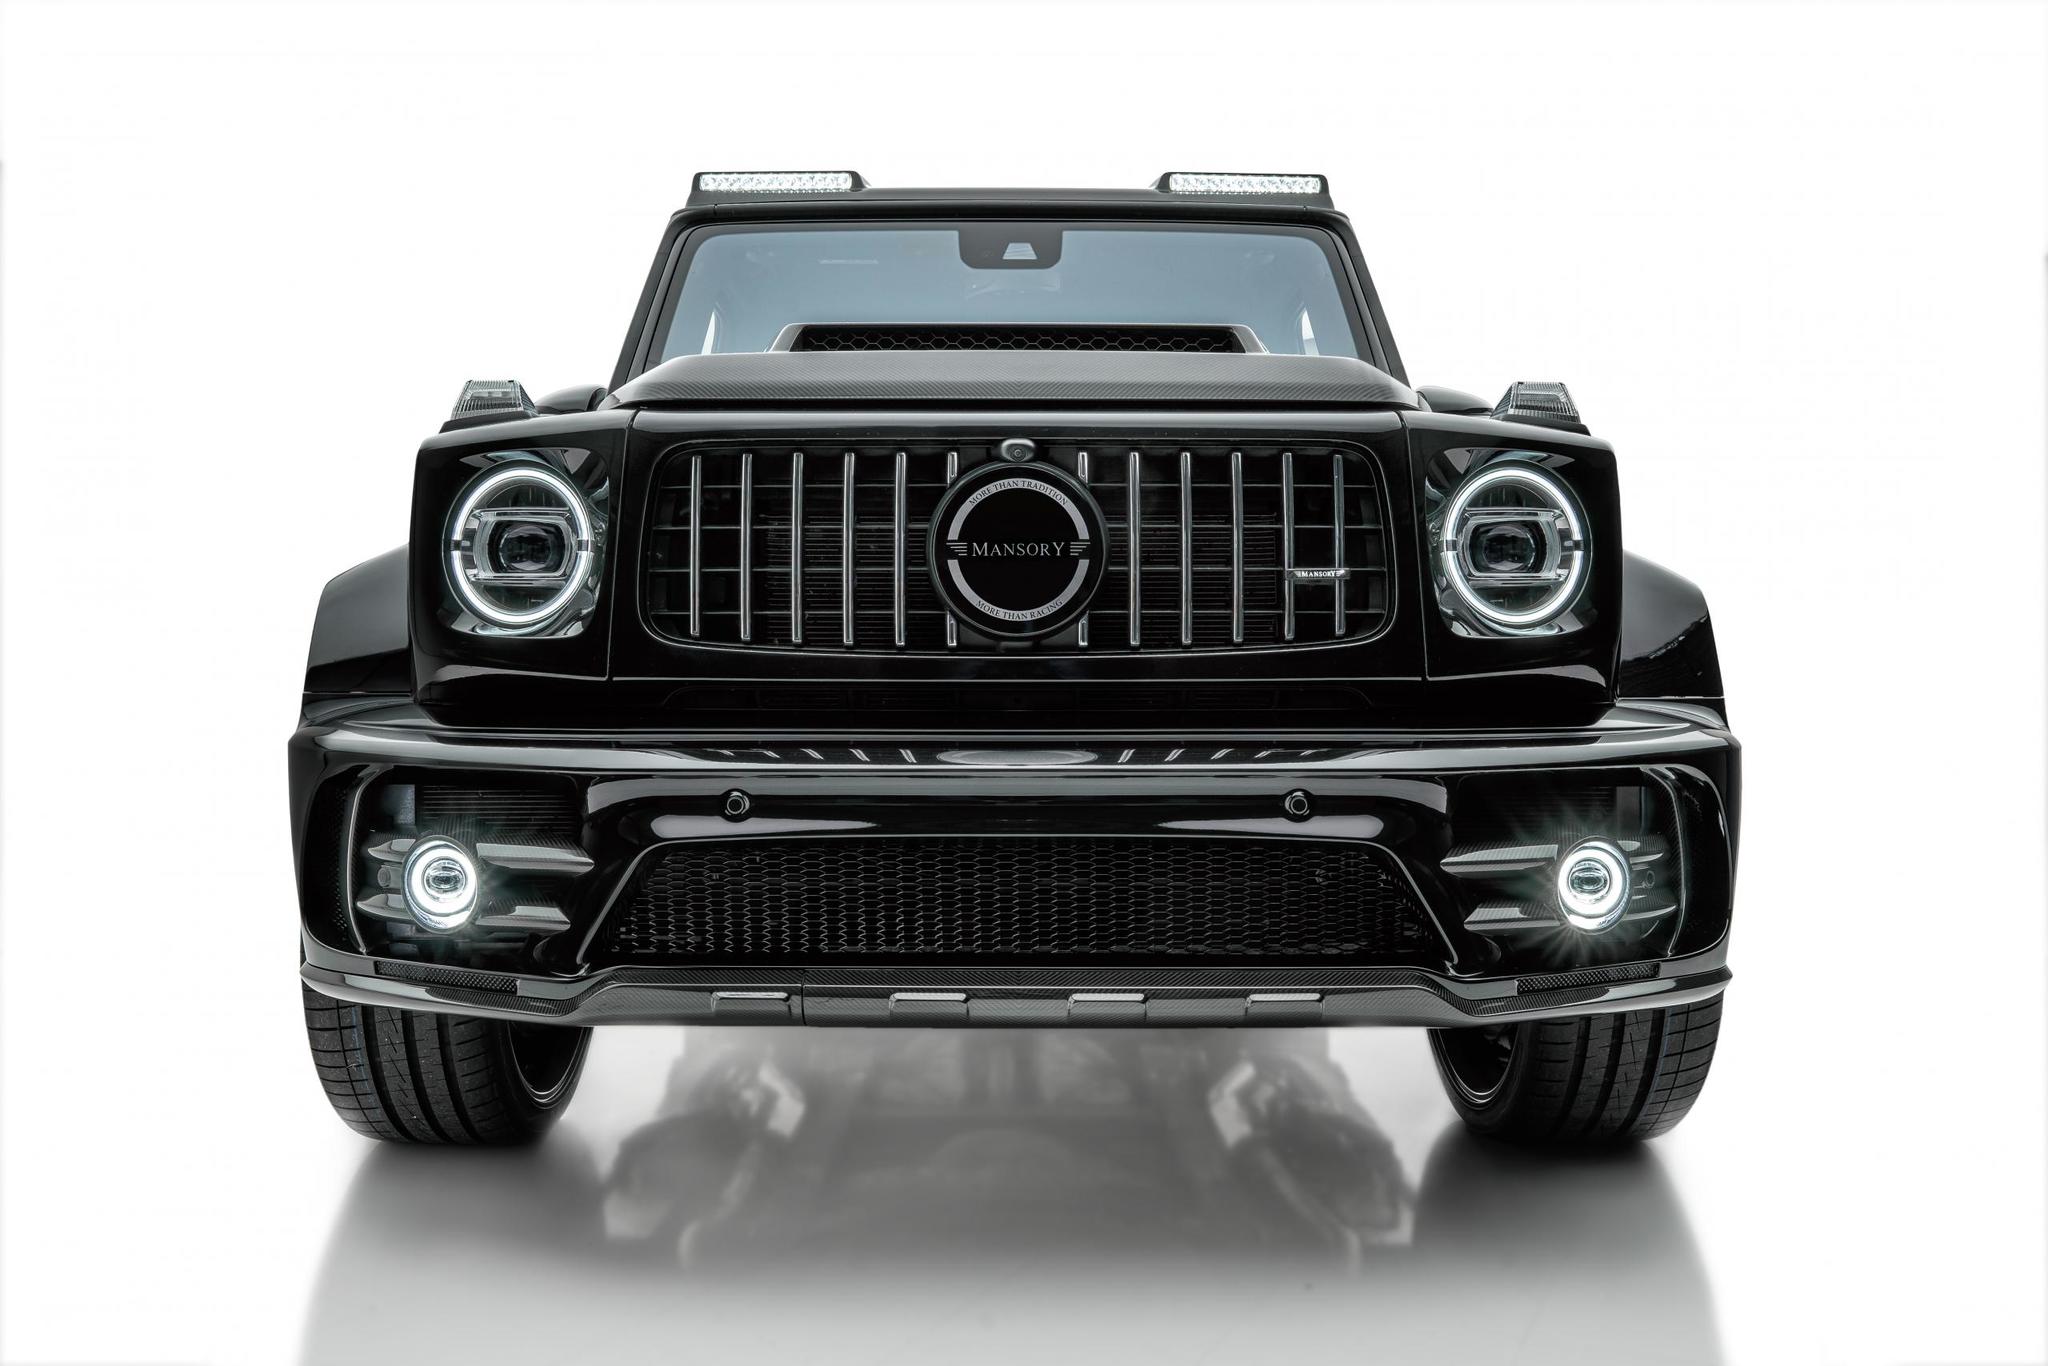 Mansory body kit for Mercedes G-class new style